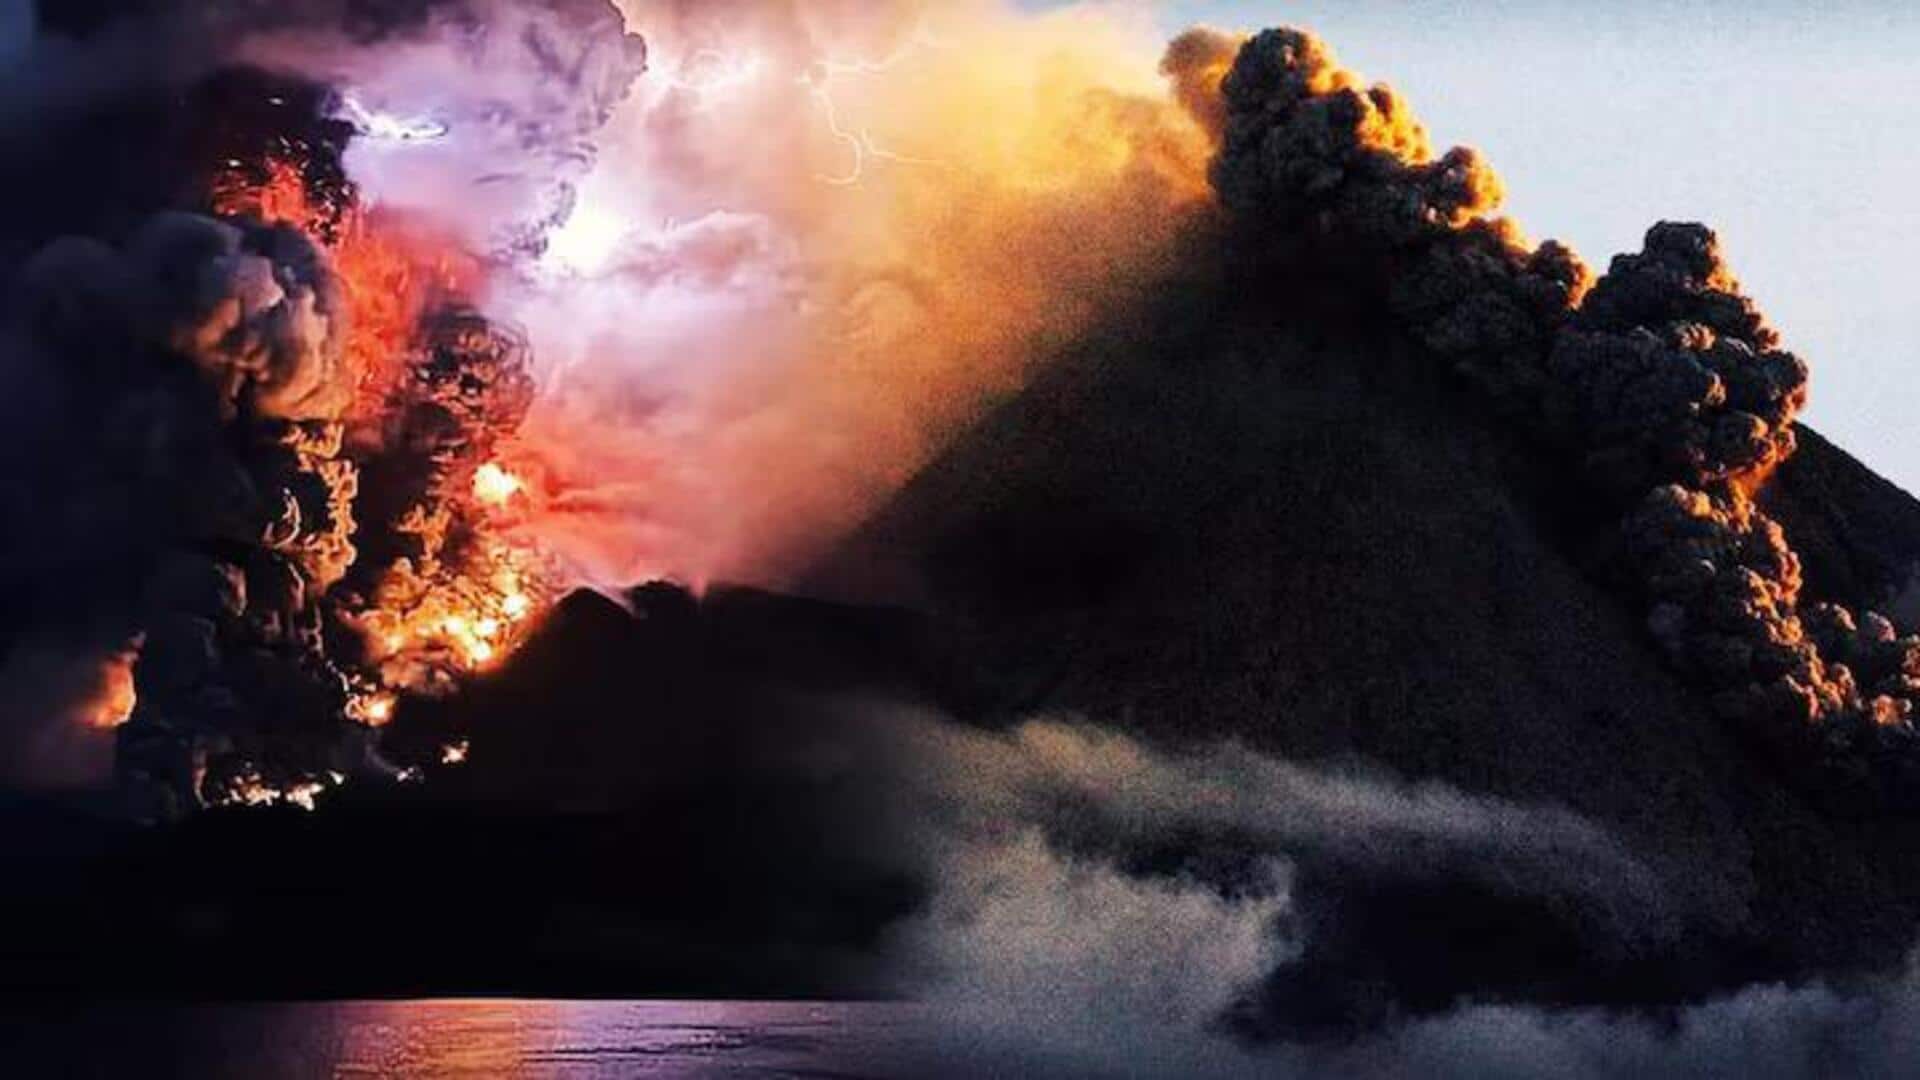 Chinese tourist falls into active volcano, dies while clicking pictures